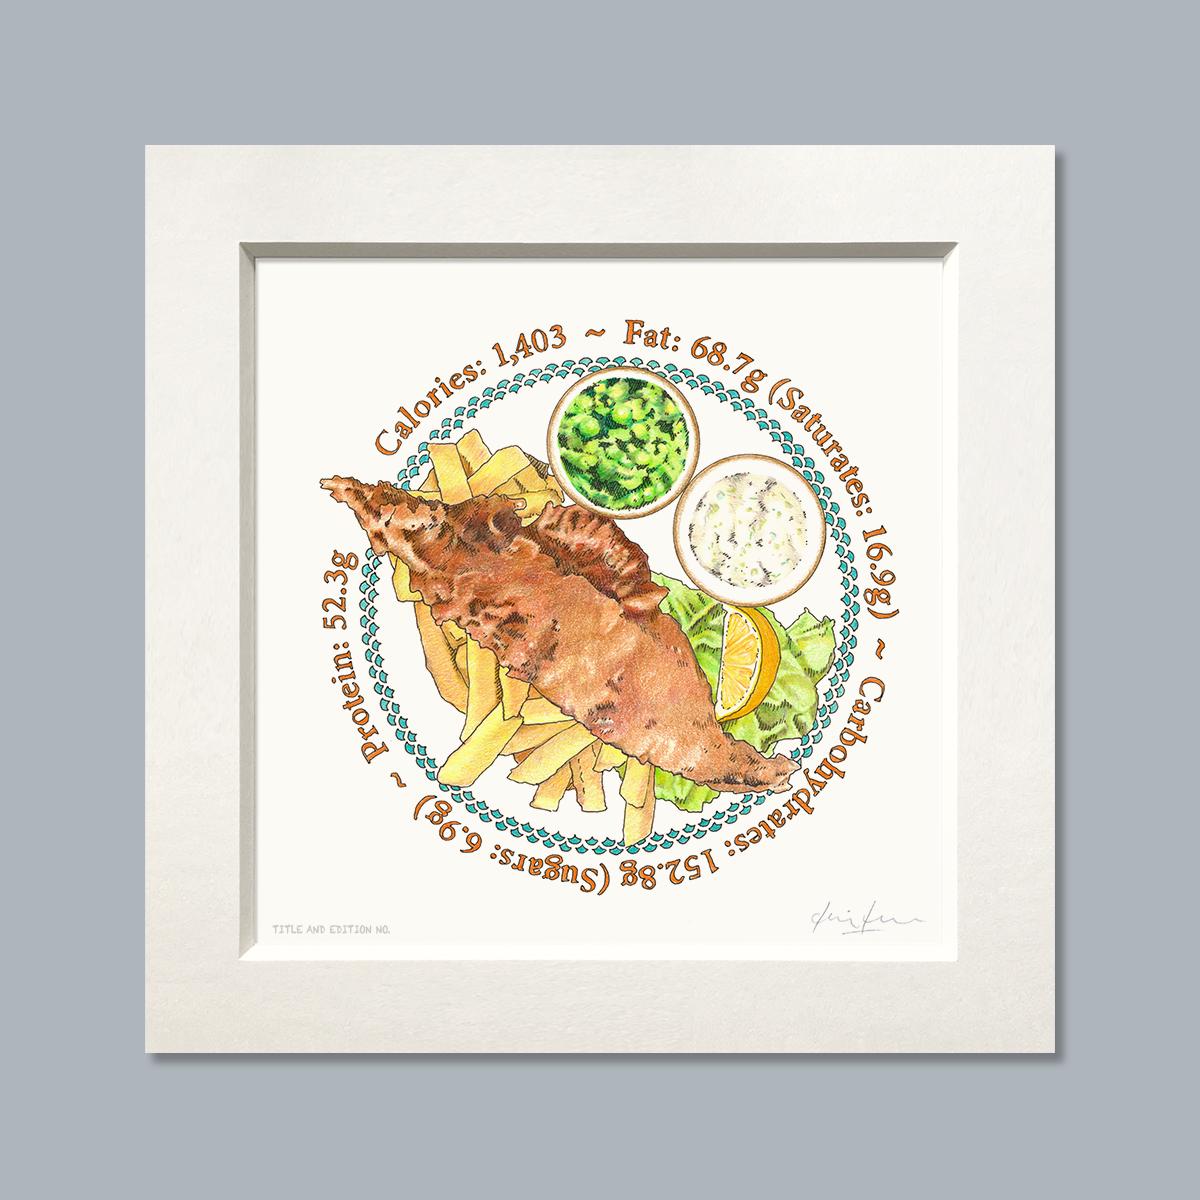 Limited edition print of a coloured drawing of a plate of fish and chips, in a white mount.